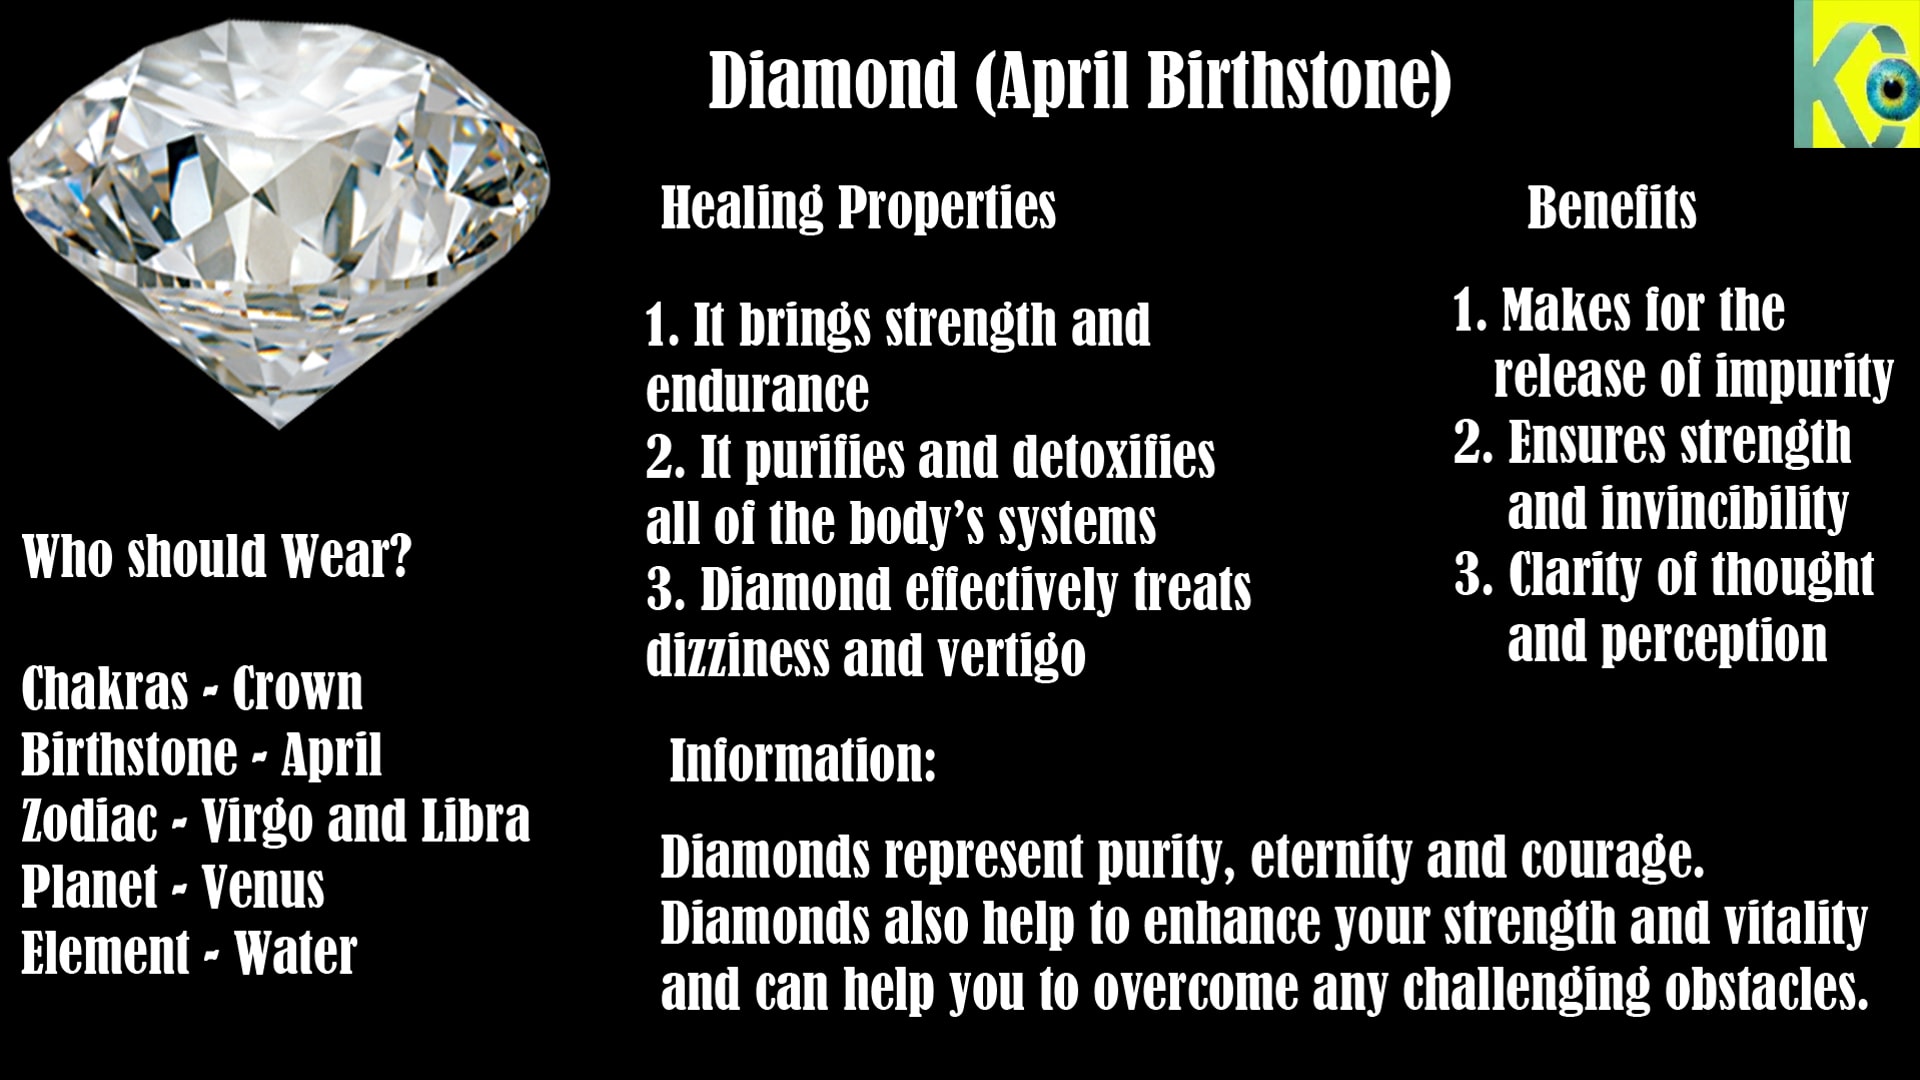 Diamond is the birthstone for those born in the month of April